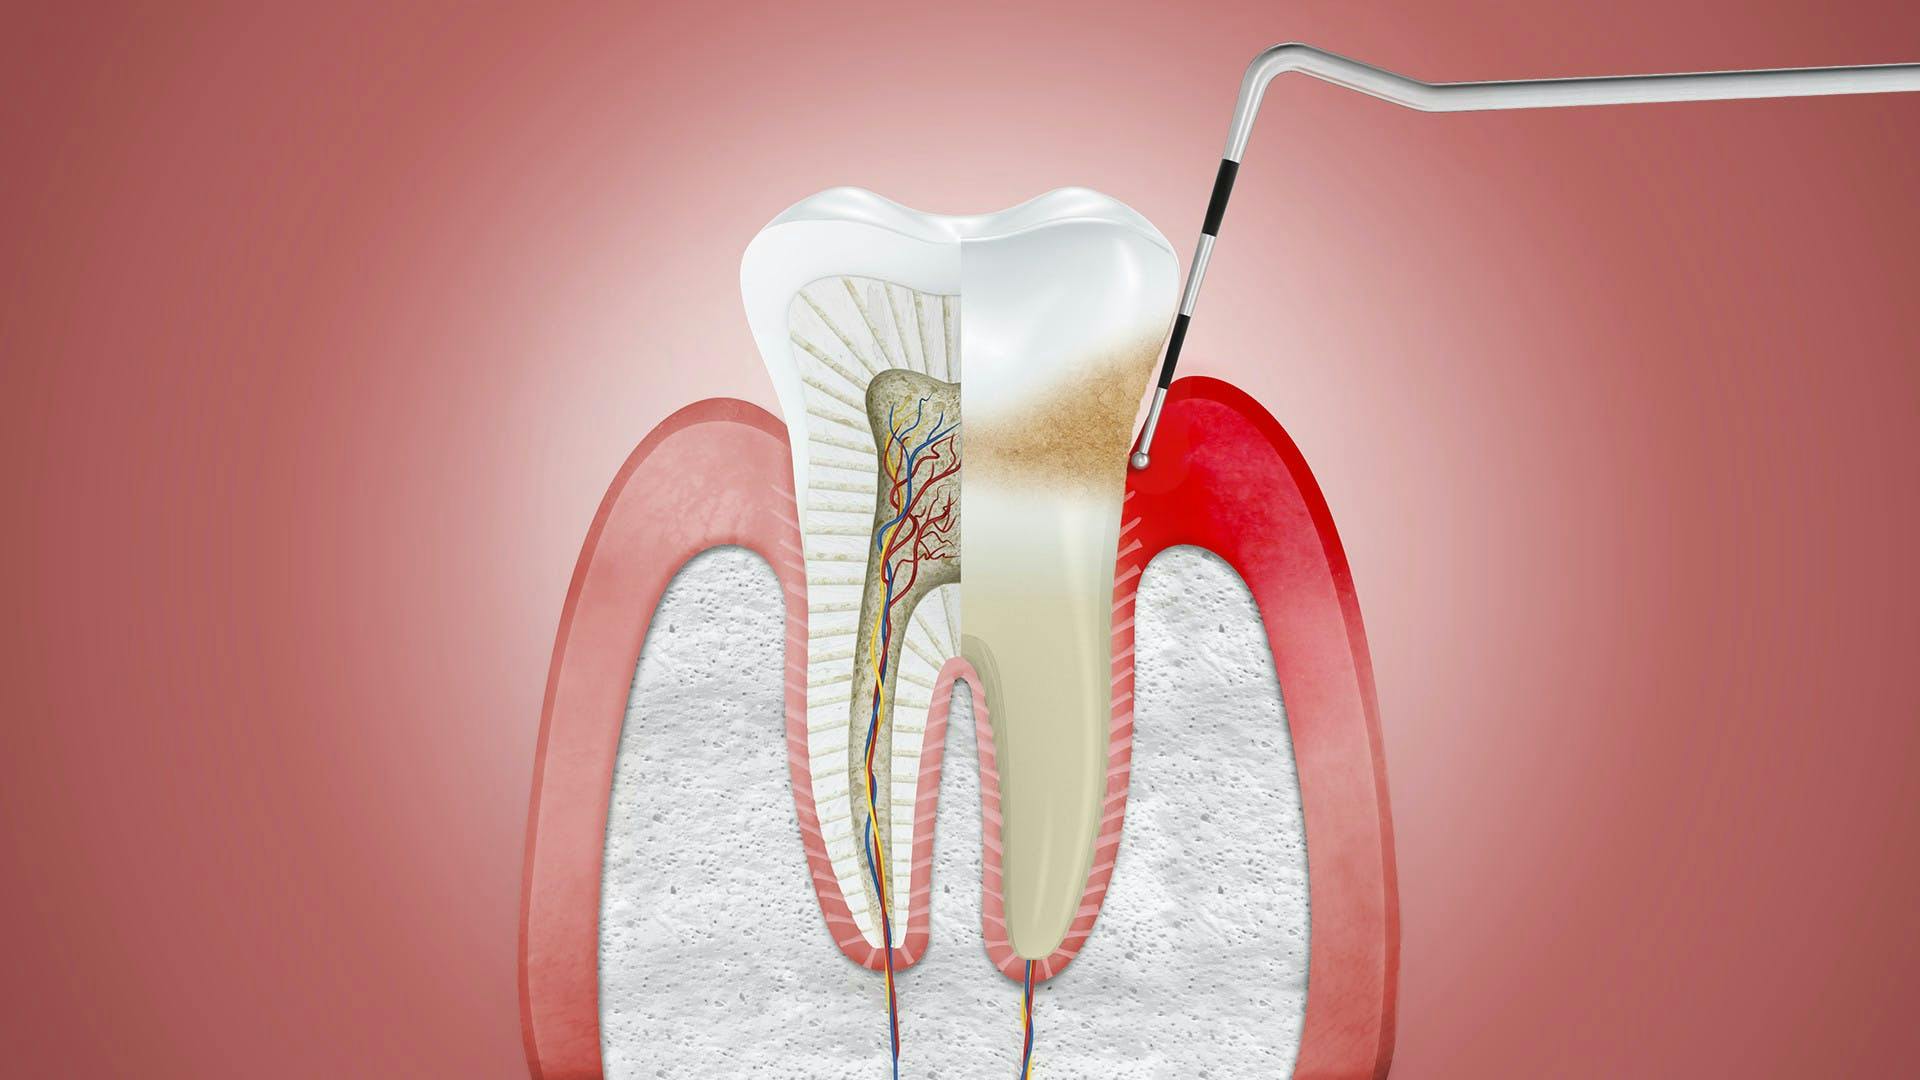 Illustration of gums affected by periodontitis, with dentist tool